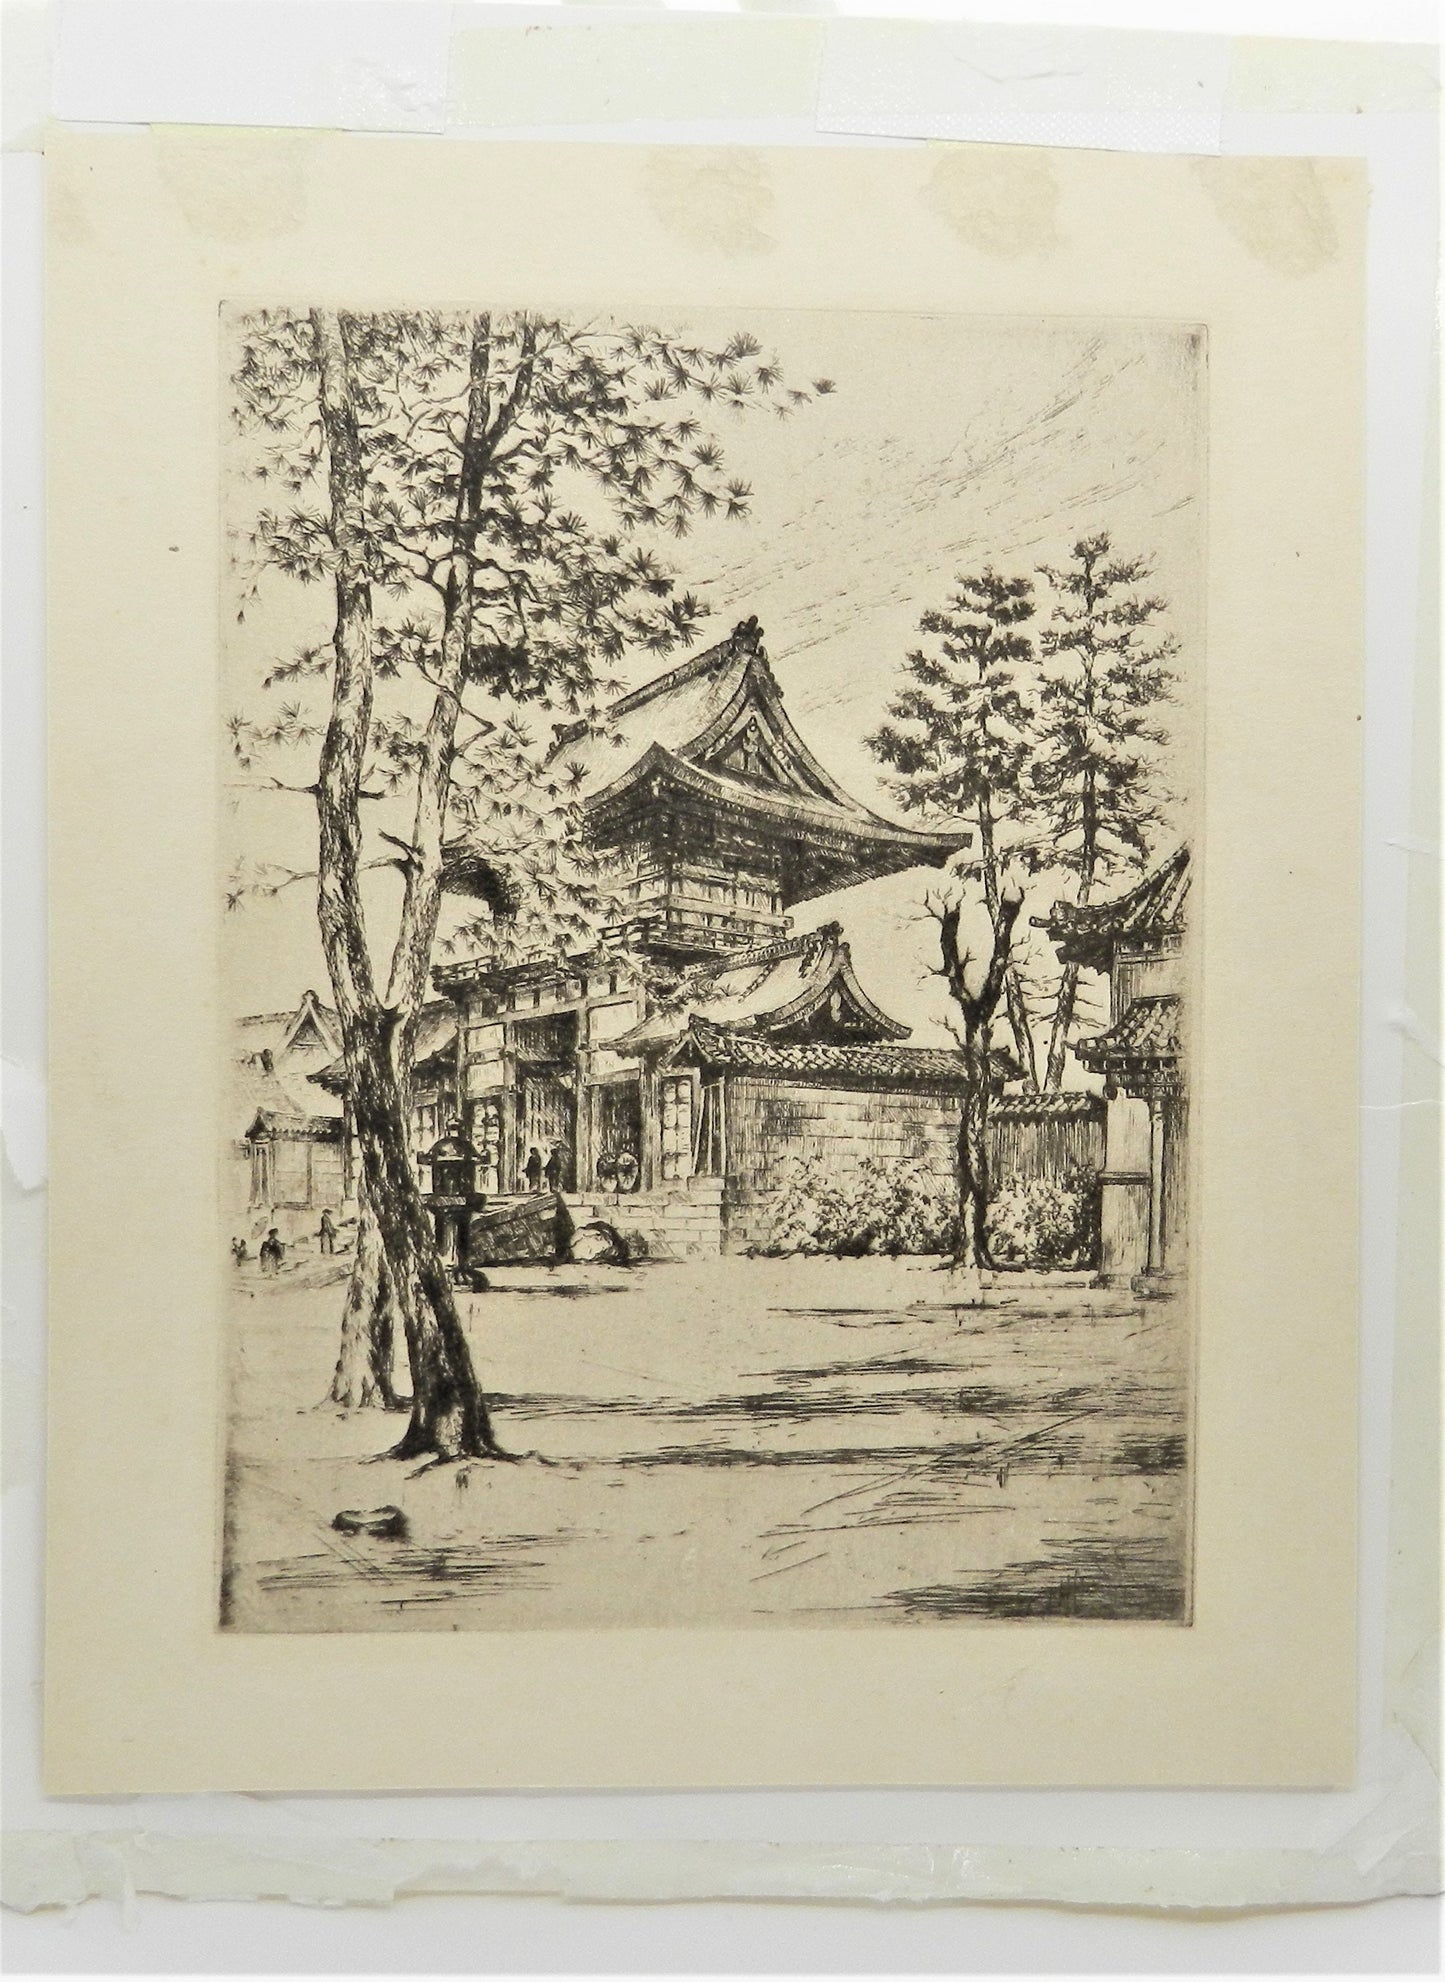 Vintage Original Etching Asian Temple and Trees - Matted 8x10